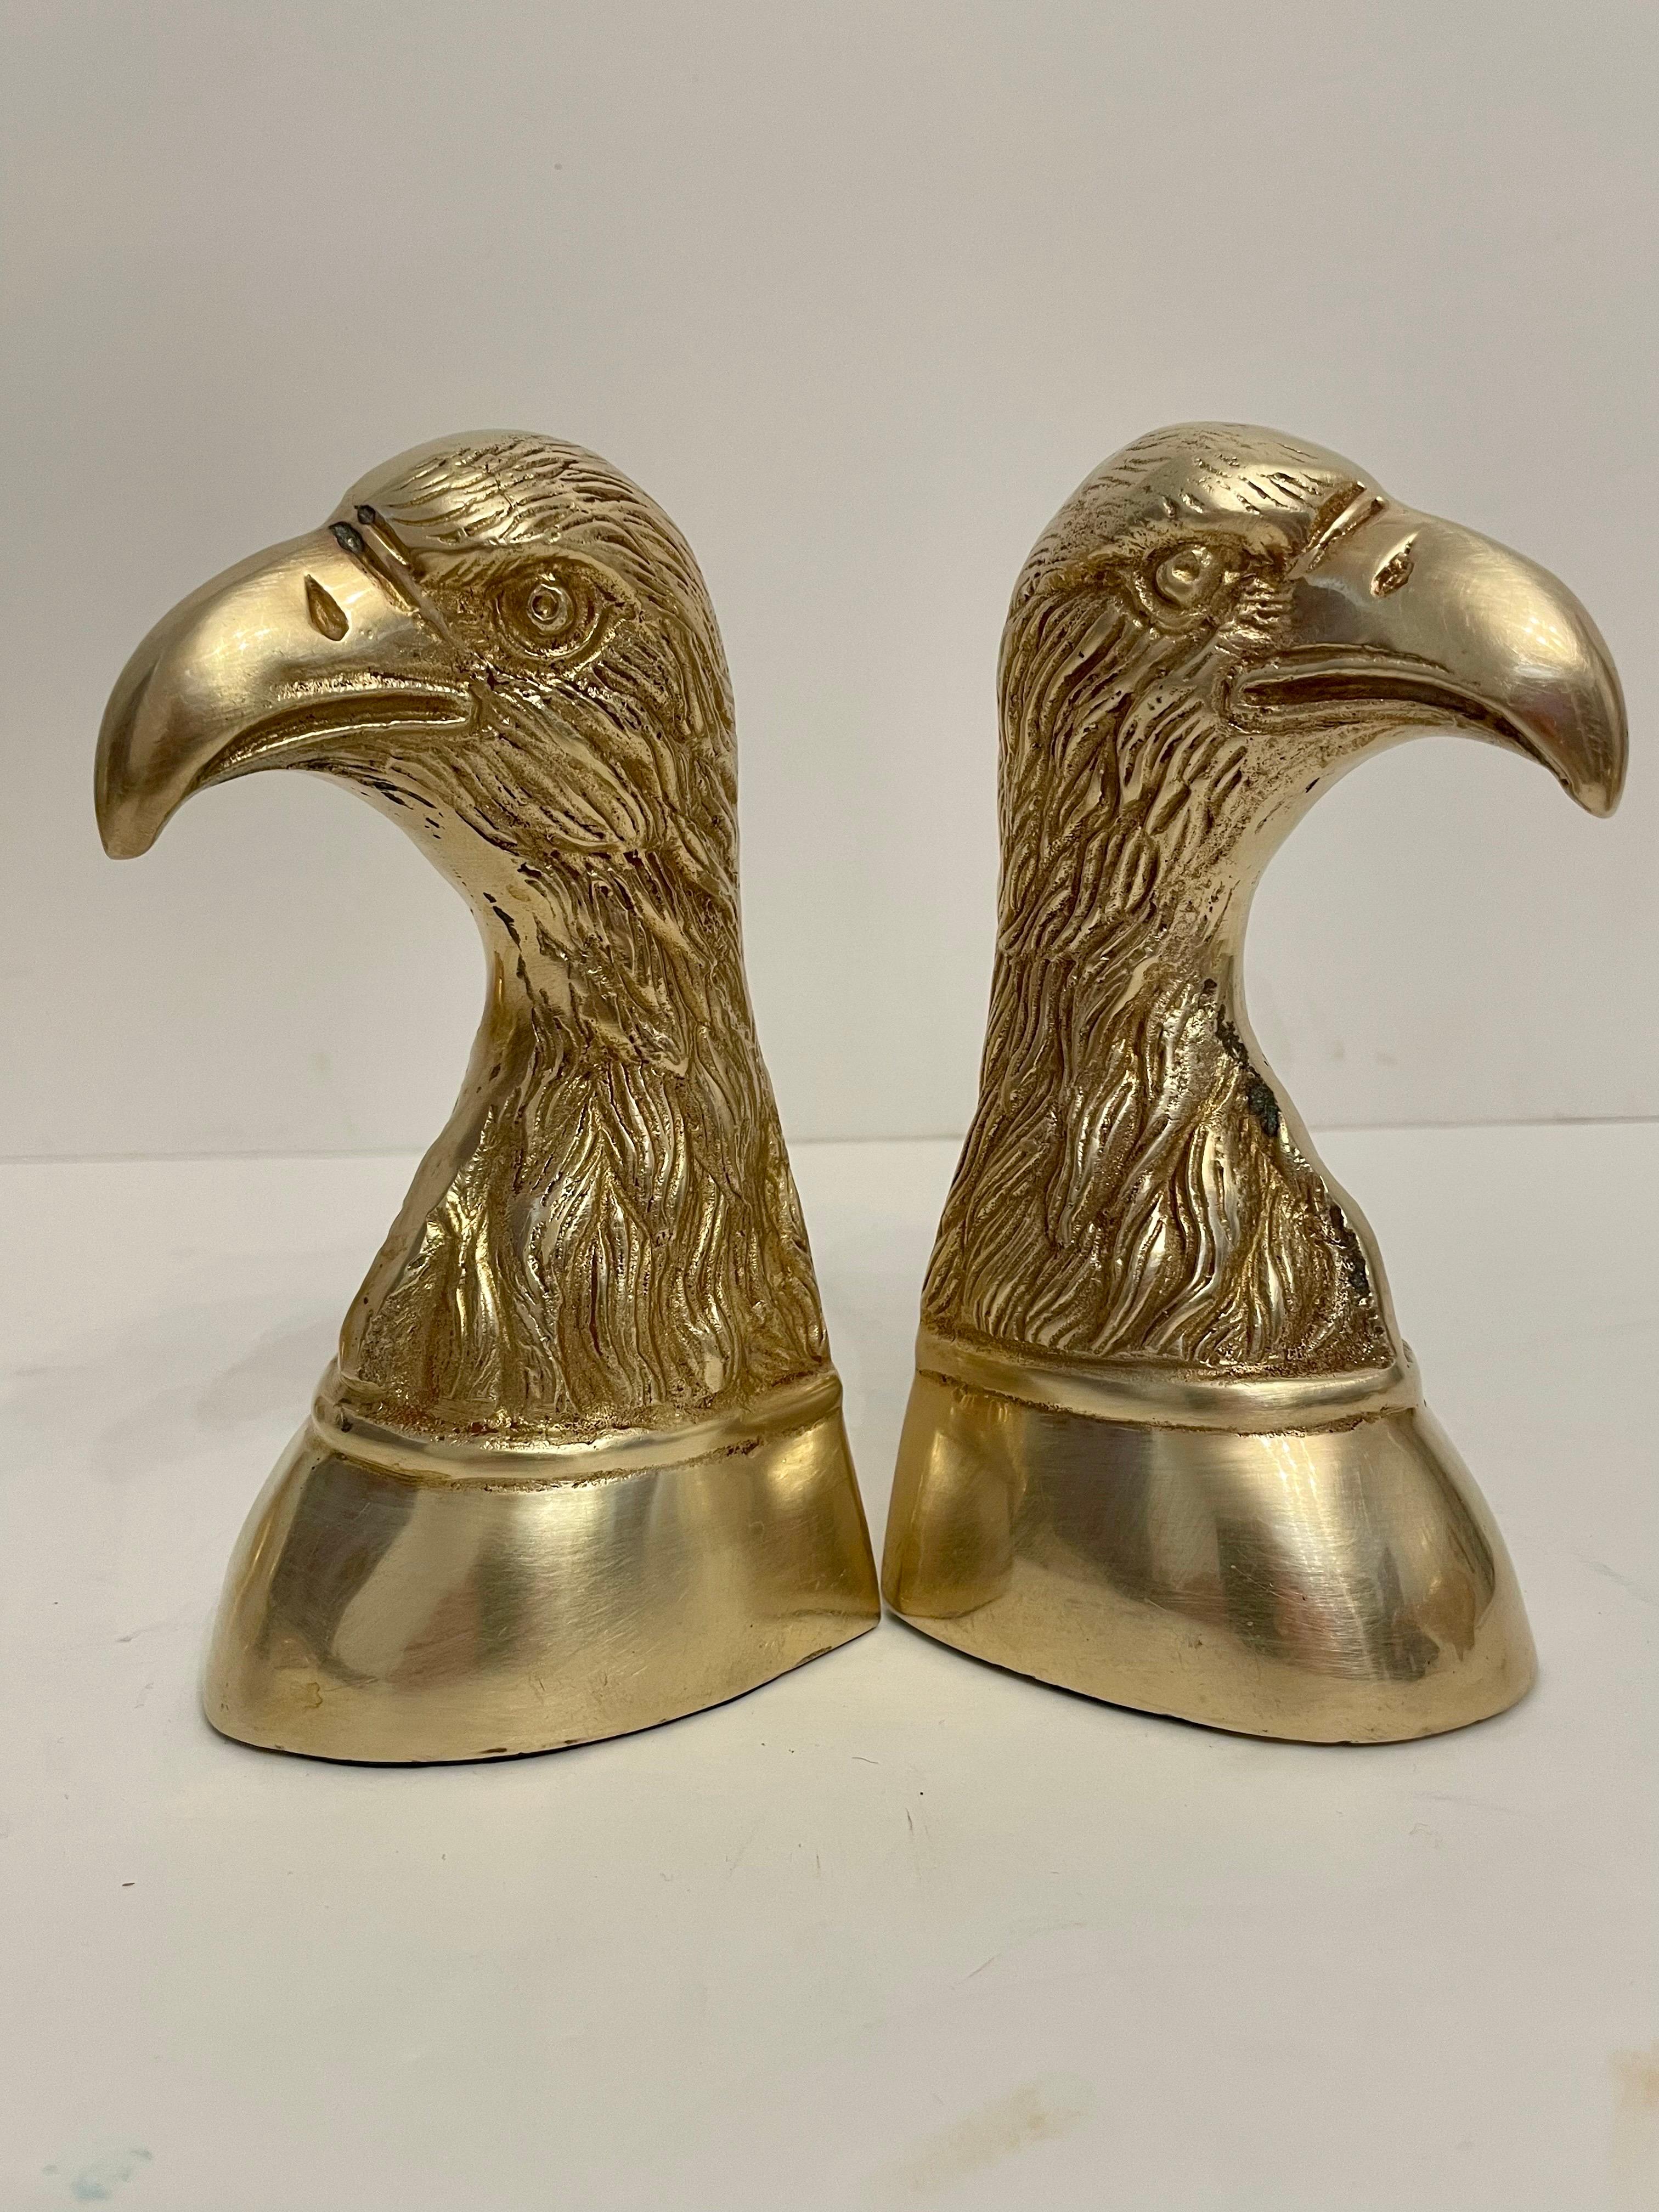 Nice set of heavy brass Eagle bookends. Has thin felt on bottom of each to prevent scratching furniture.  Great on a book shelf or desk. Nice condition, ready to use. 6.5” tall 3.5 deep x 3” wide